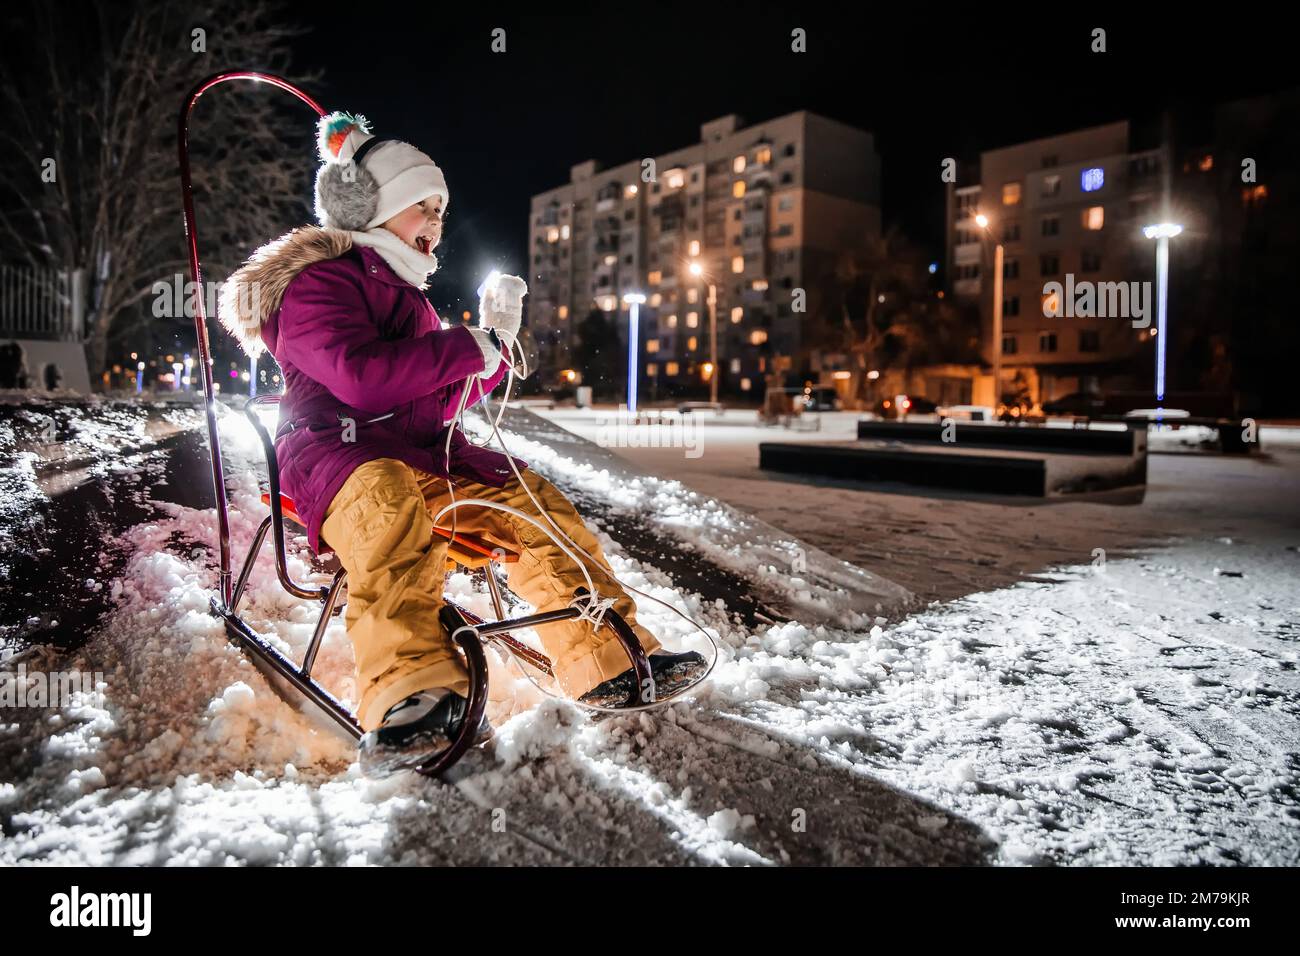 A little girl is sledding on a snowy winter evening. Stock Photo